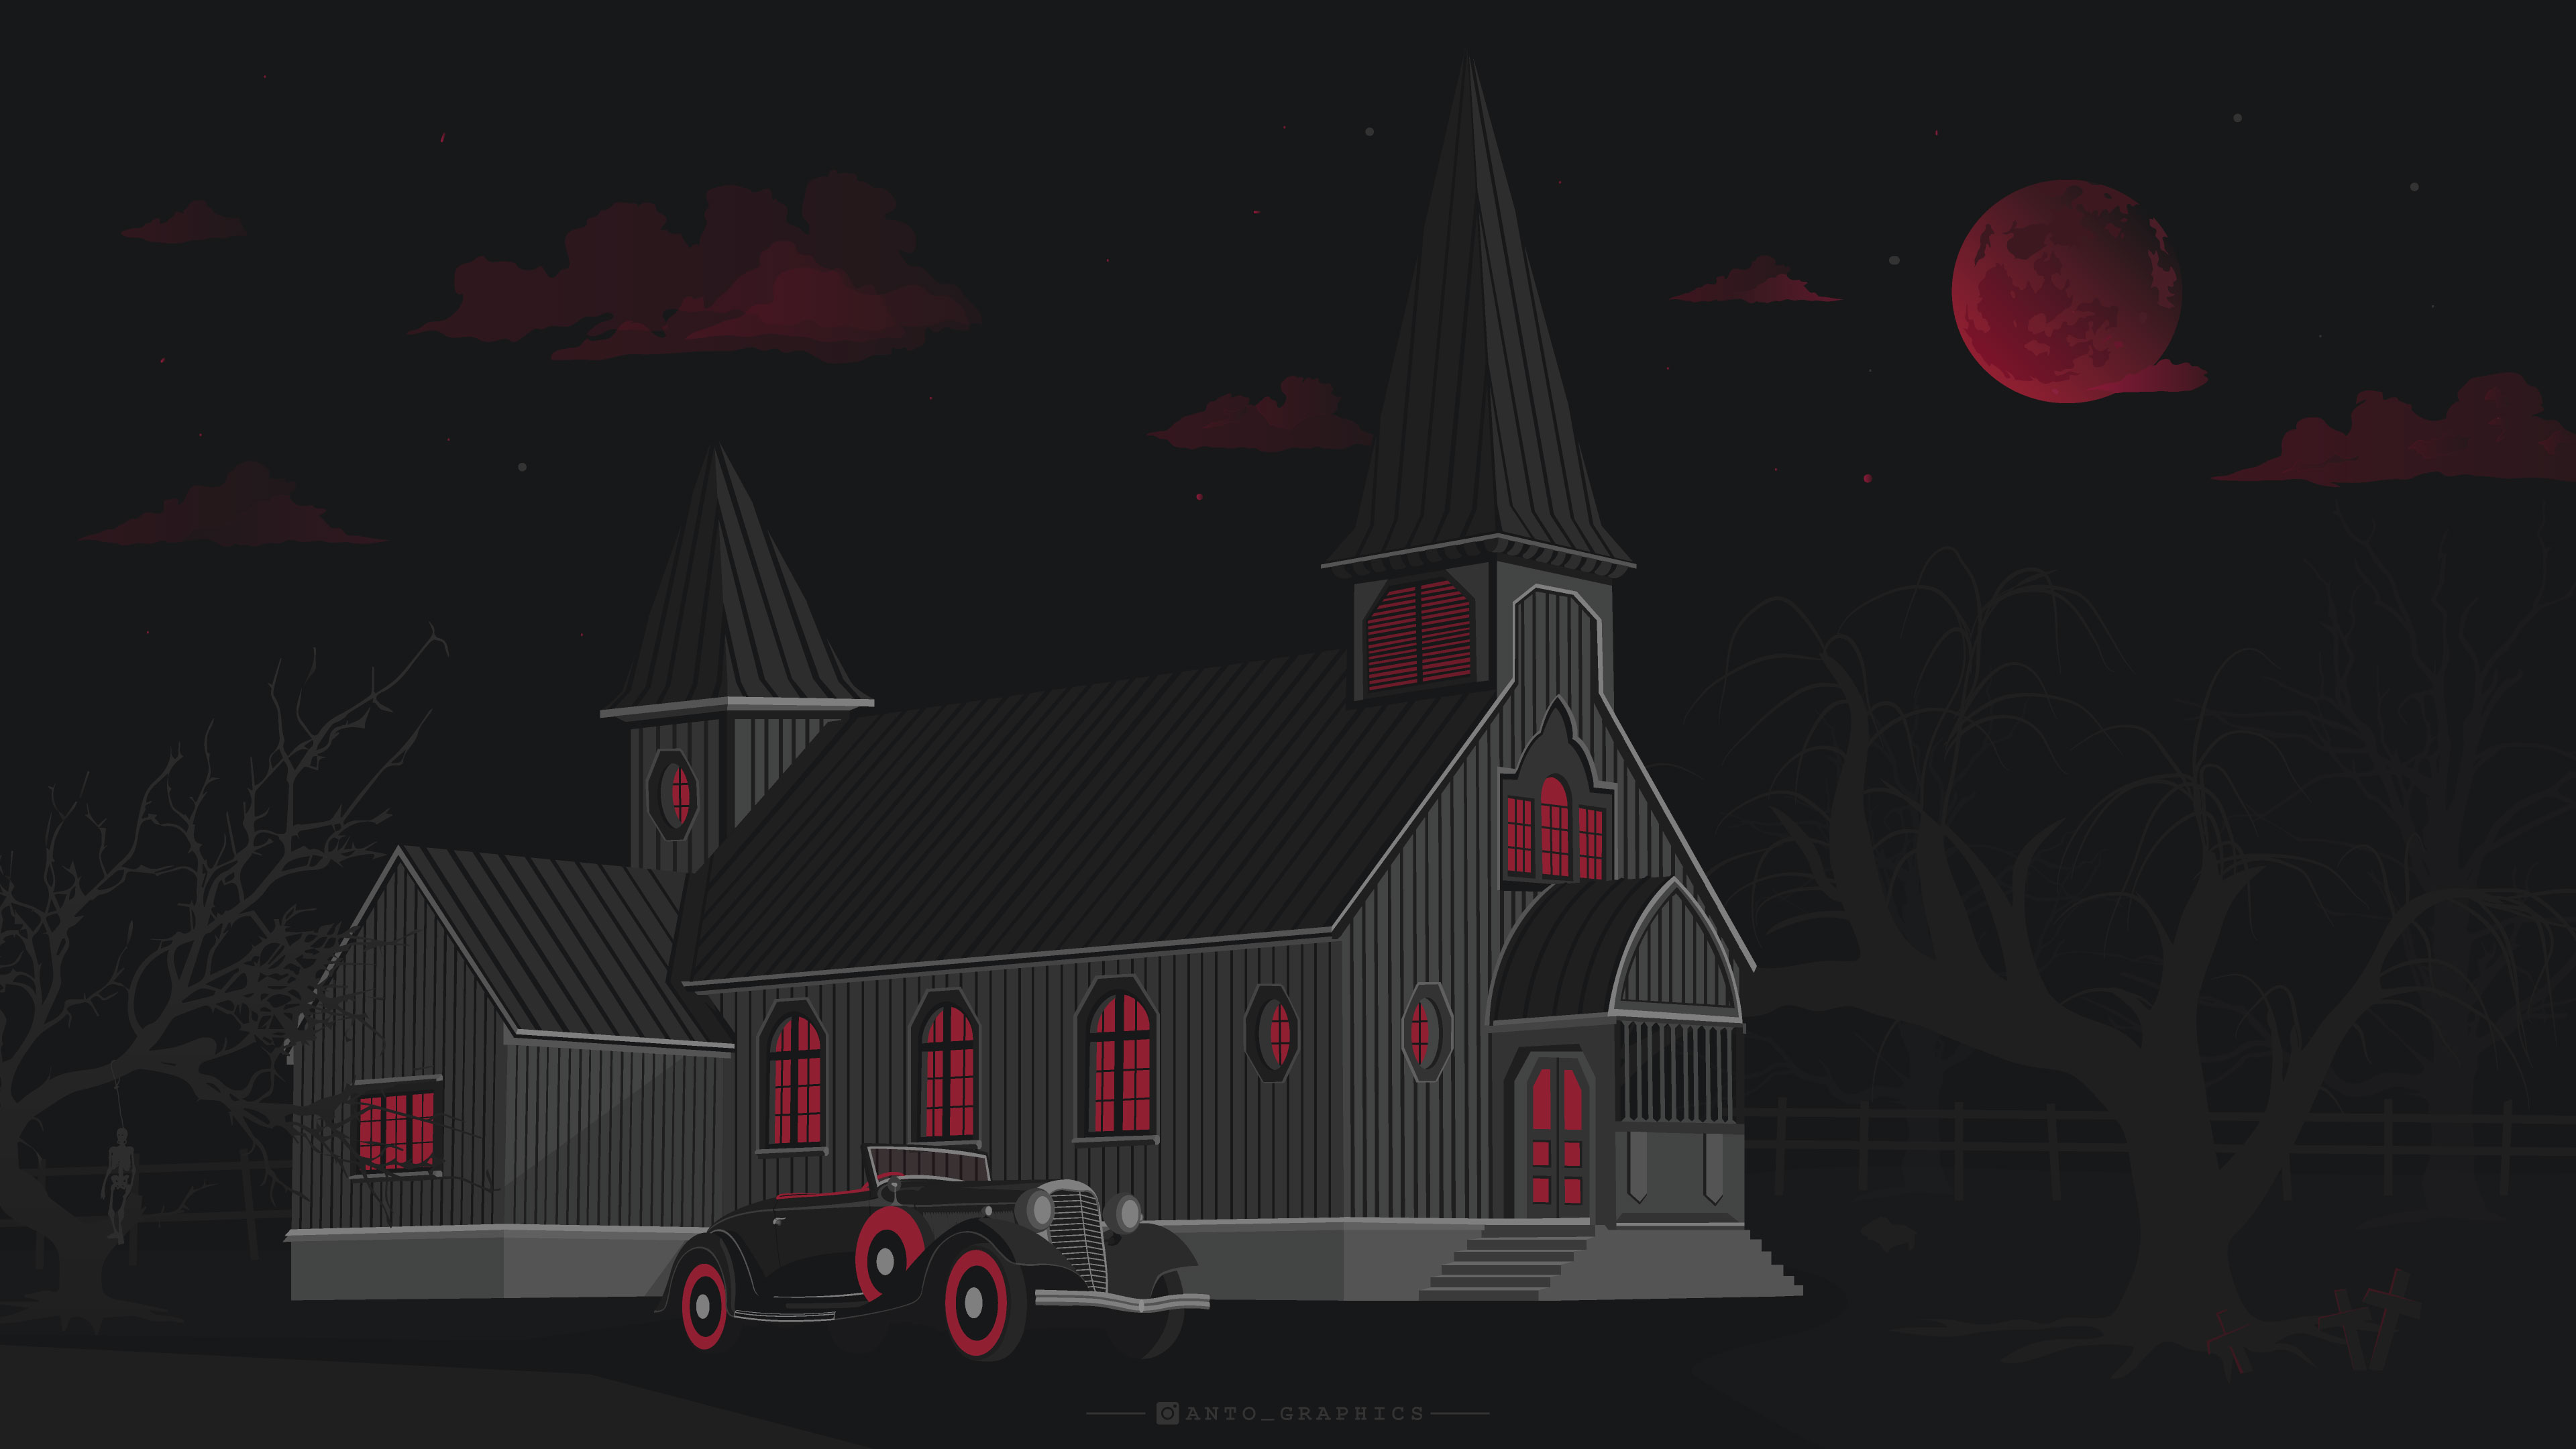 General 3840x2160 antographics Blood moon Moon Castle house forest trees silhouette red neon vintage classic car dark dark background illustration digital art fence vehicle castle horror haunted mansion mansions skeleton pigs cross